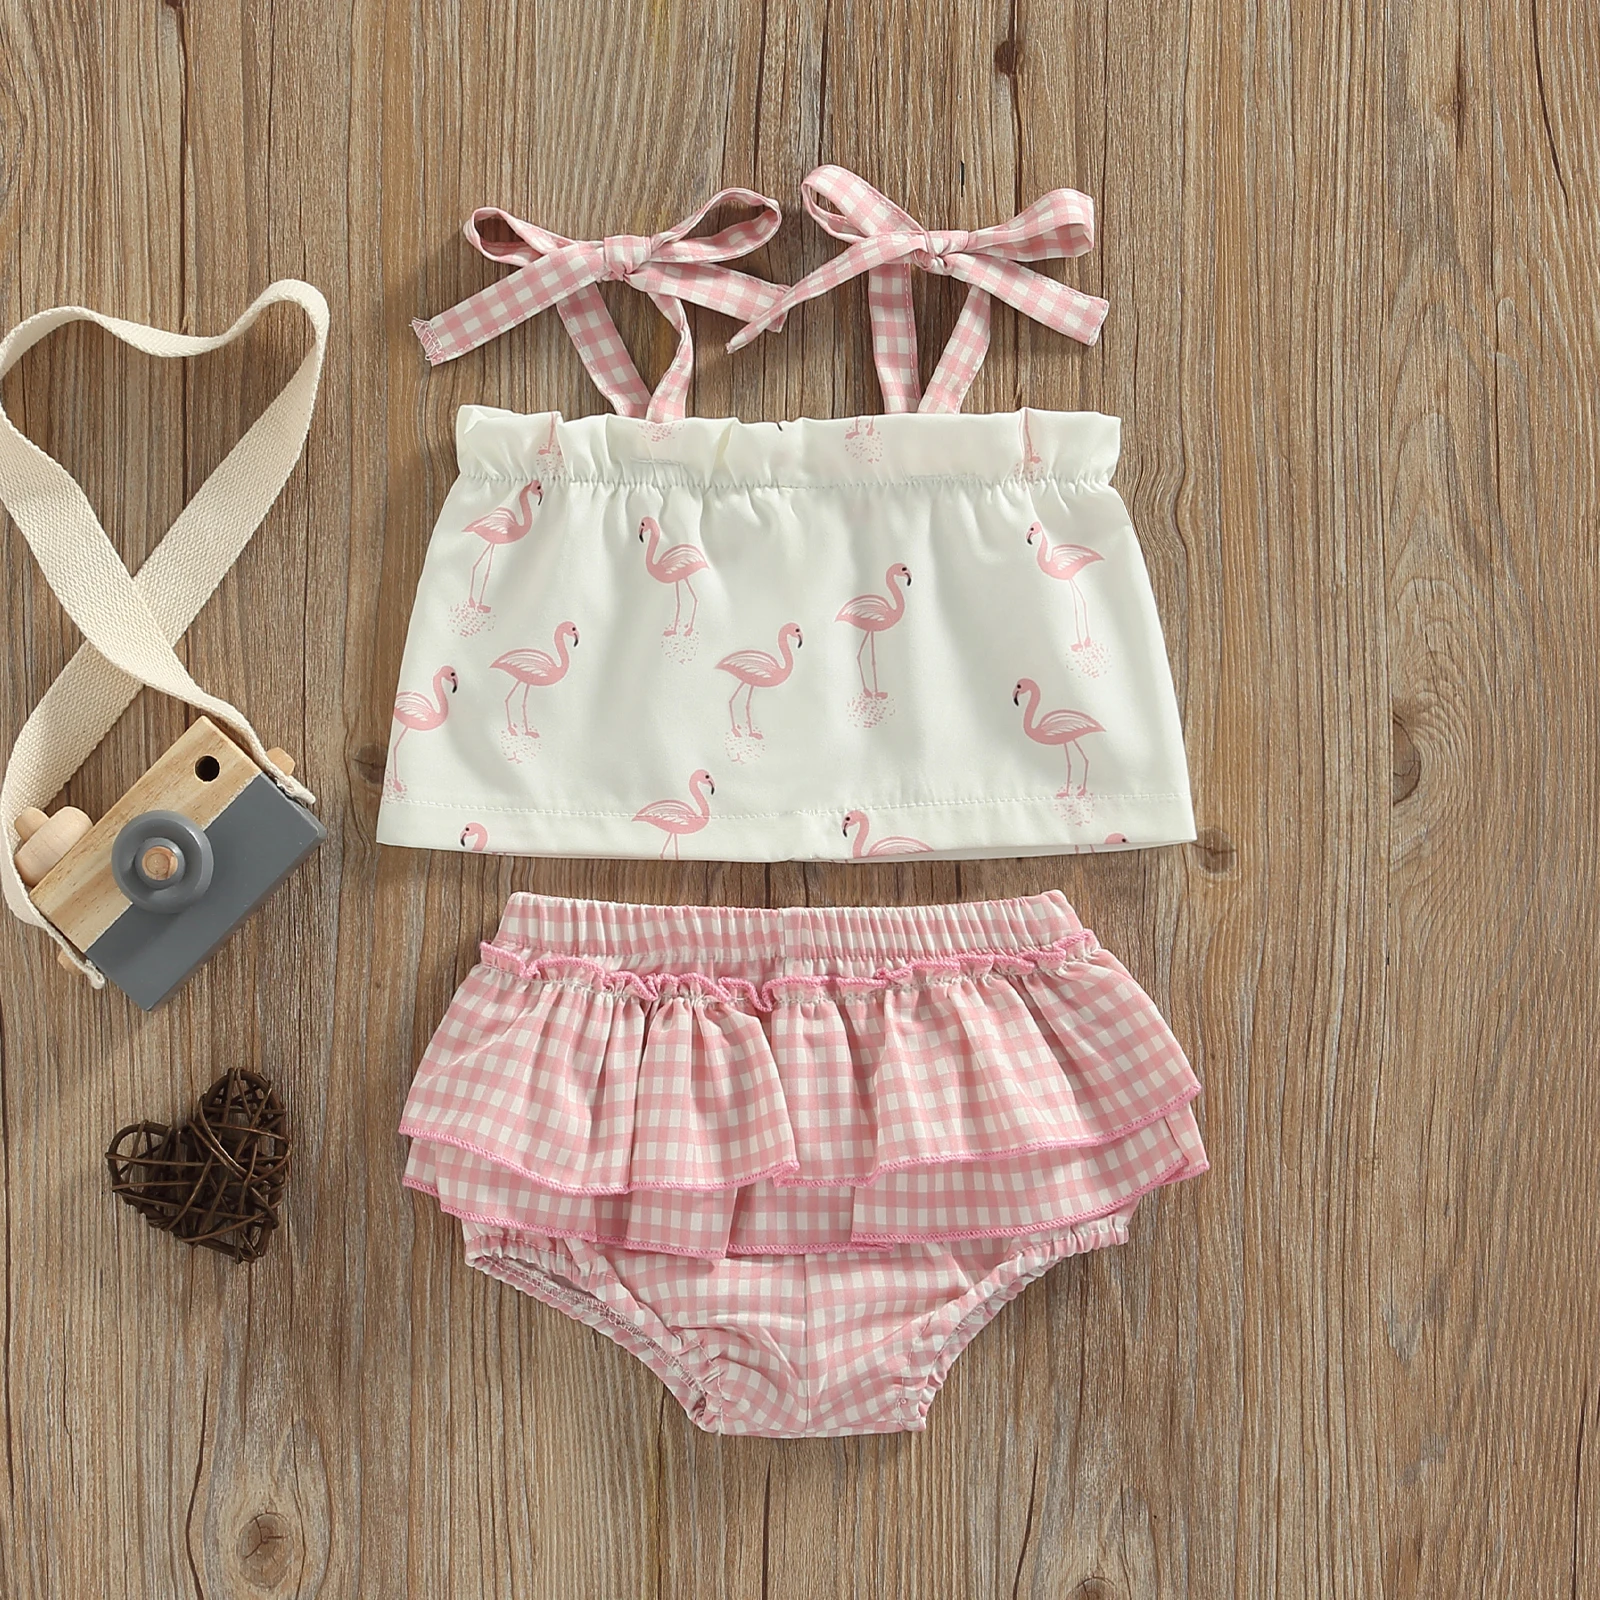 

Infants Girl 2 Pcs Outfits Suit Sleeveless Flamingo Print Tie-up Suspender Tops + Ruffle Layered Plaid Shorts